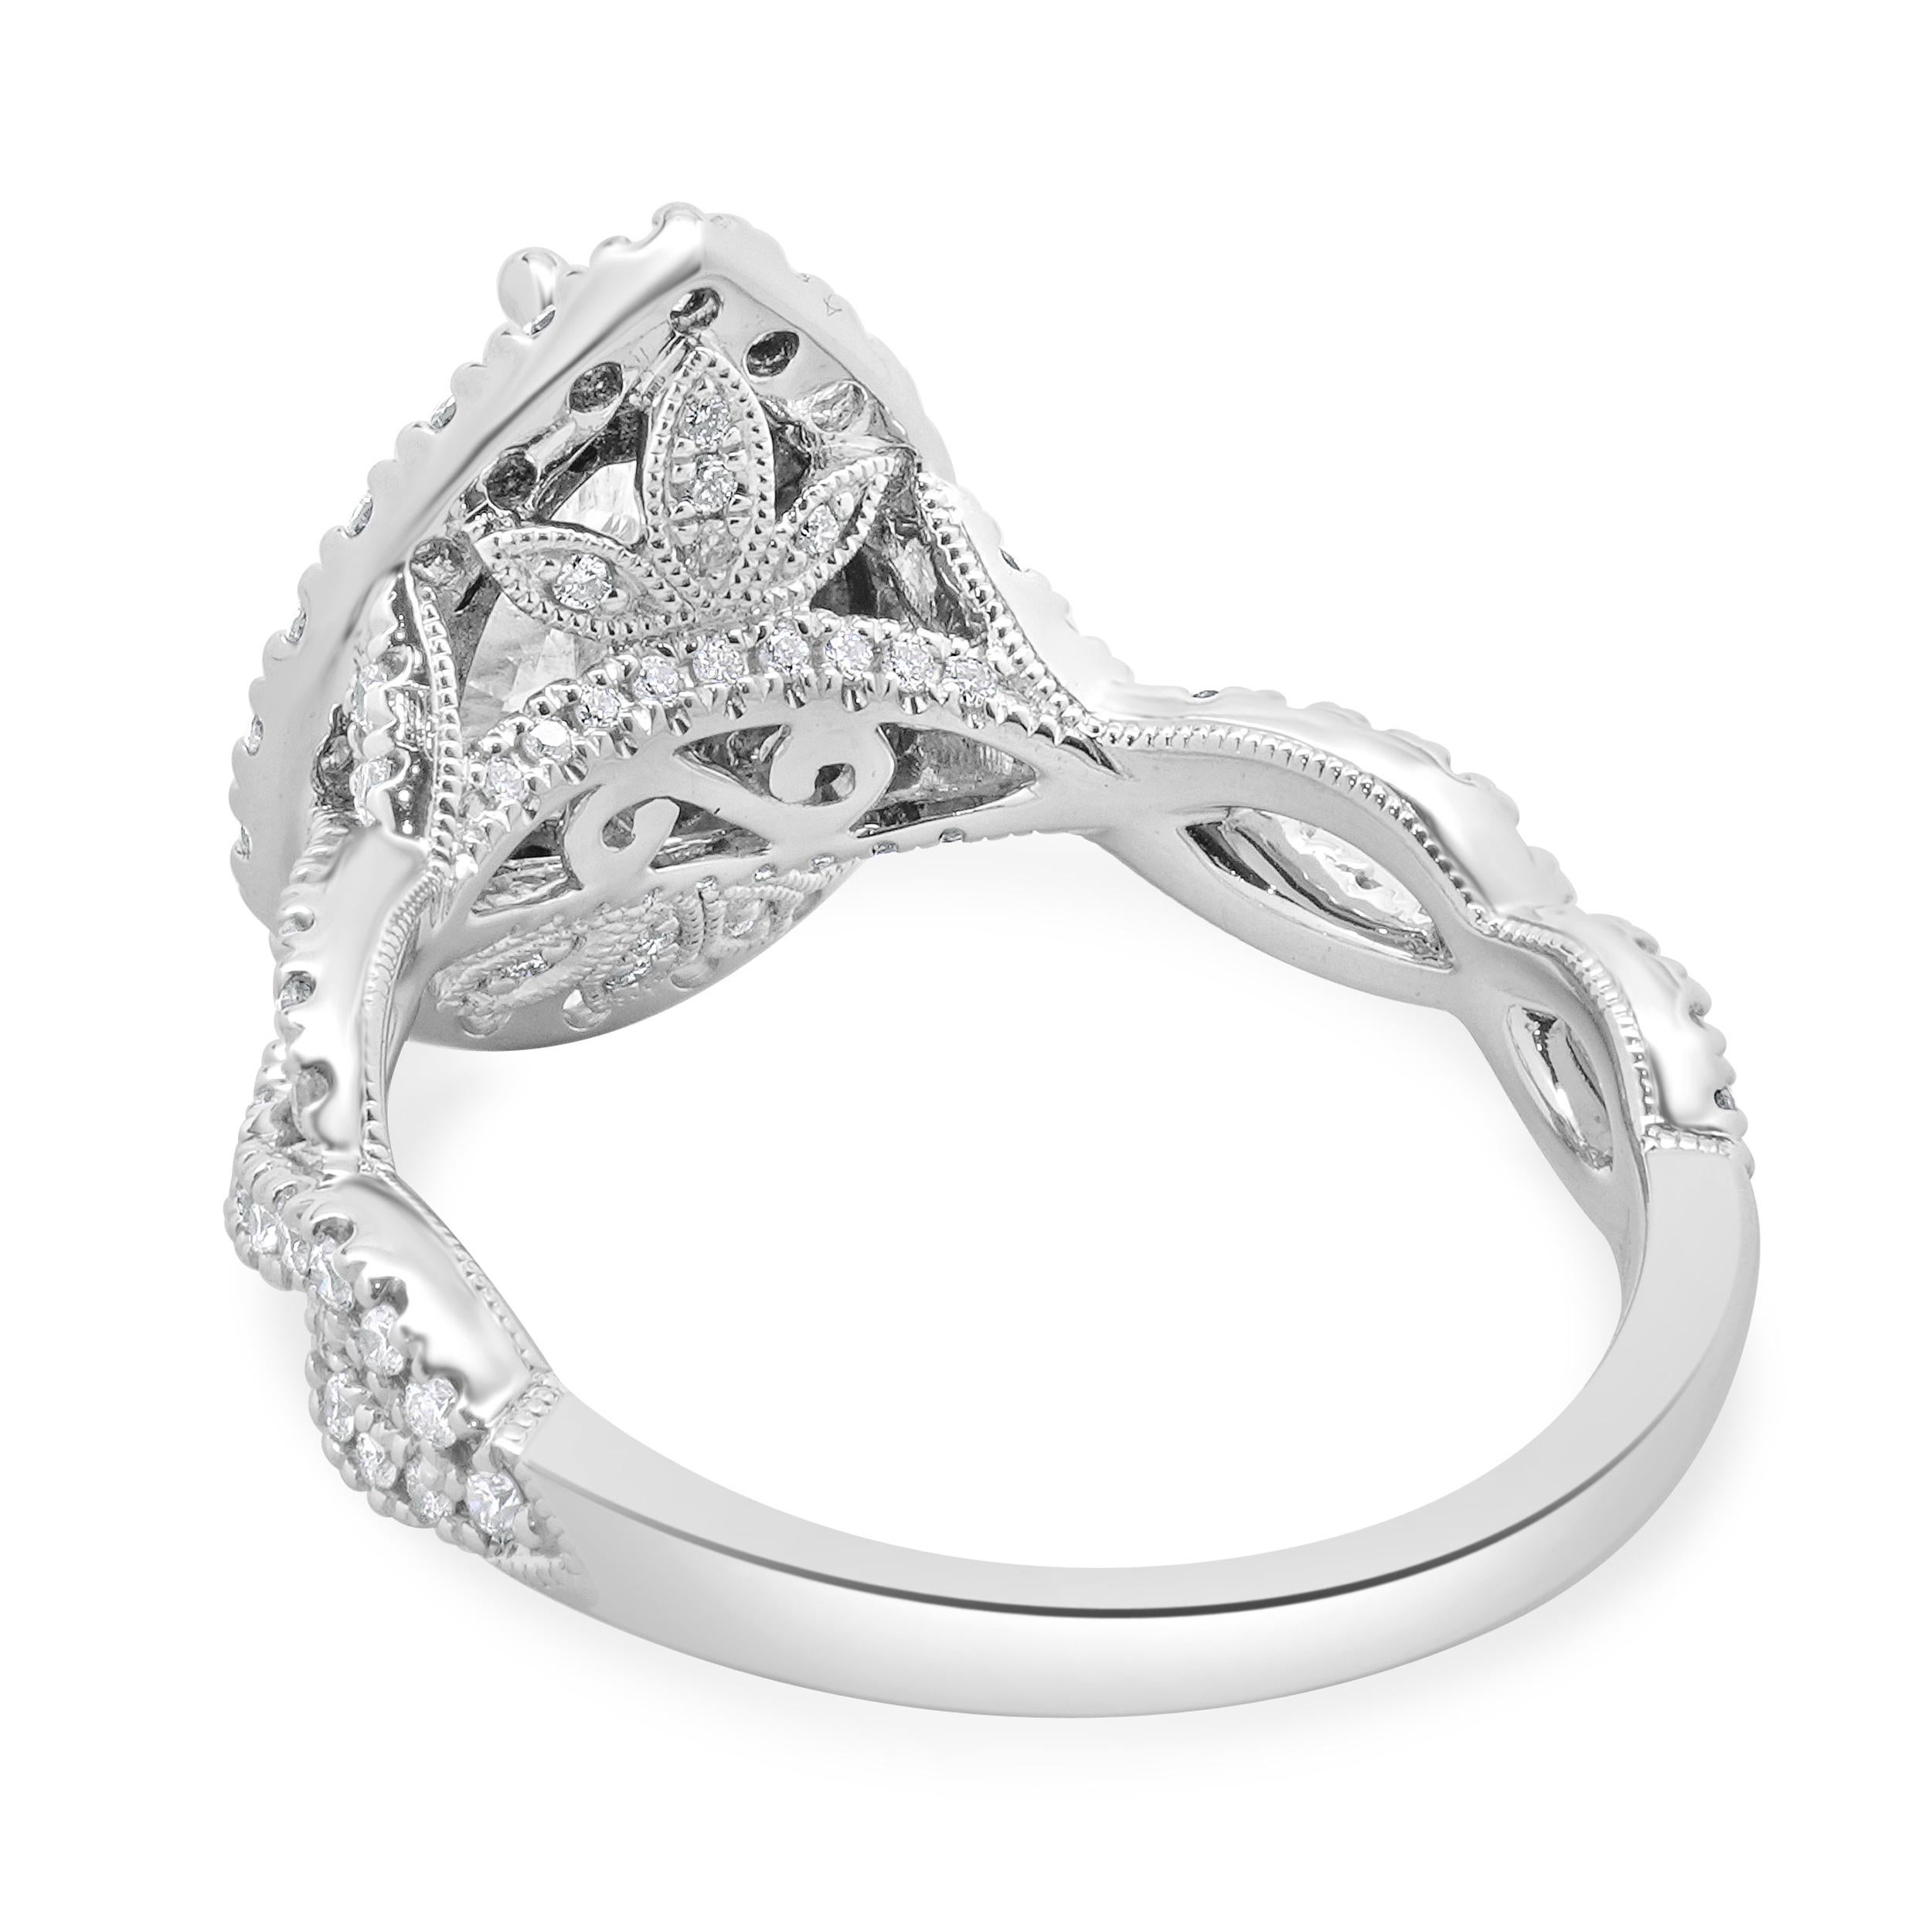 Neil Lane 14 Karat White Gold Pear Cut Diamond Engagement Ring In Excellent Condition For Sale In Scottsdale, AZ